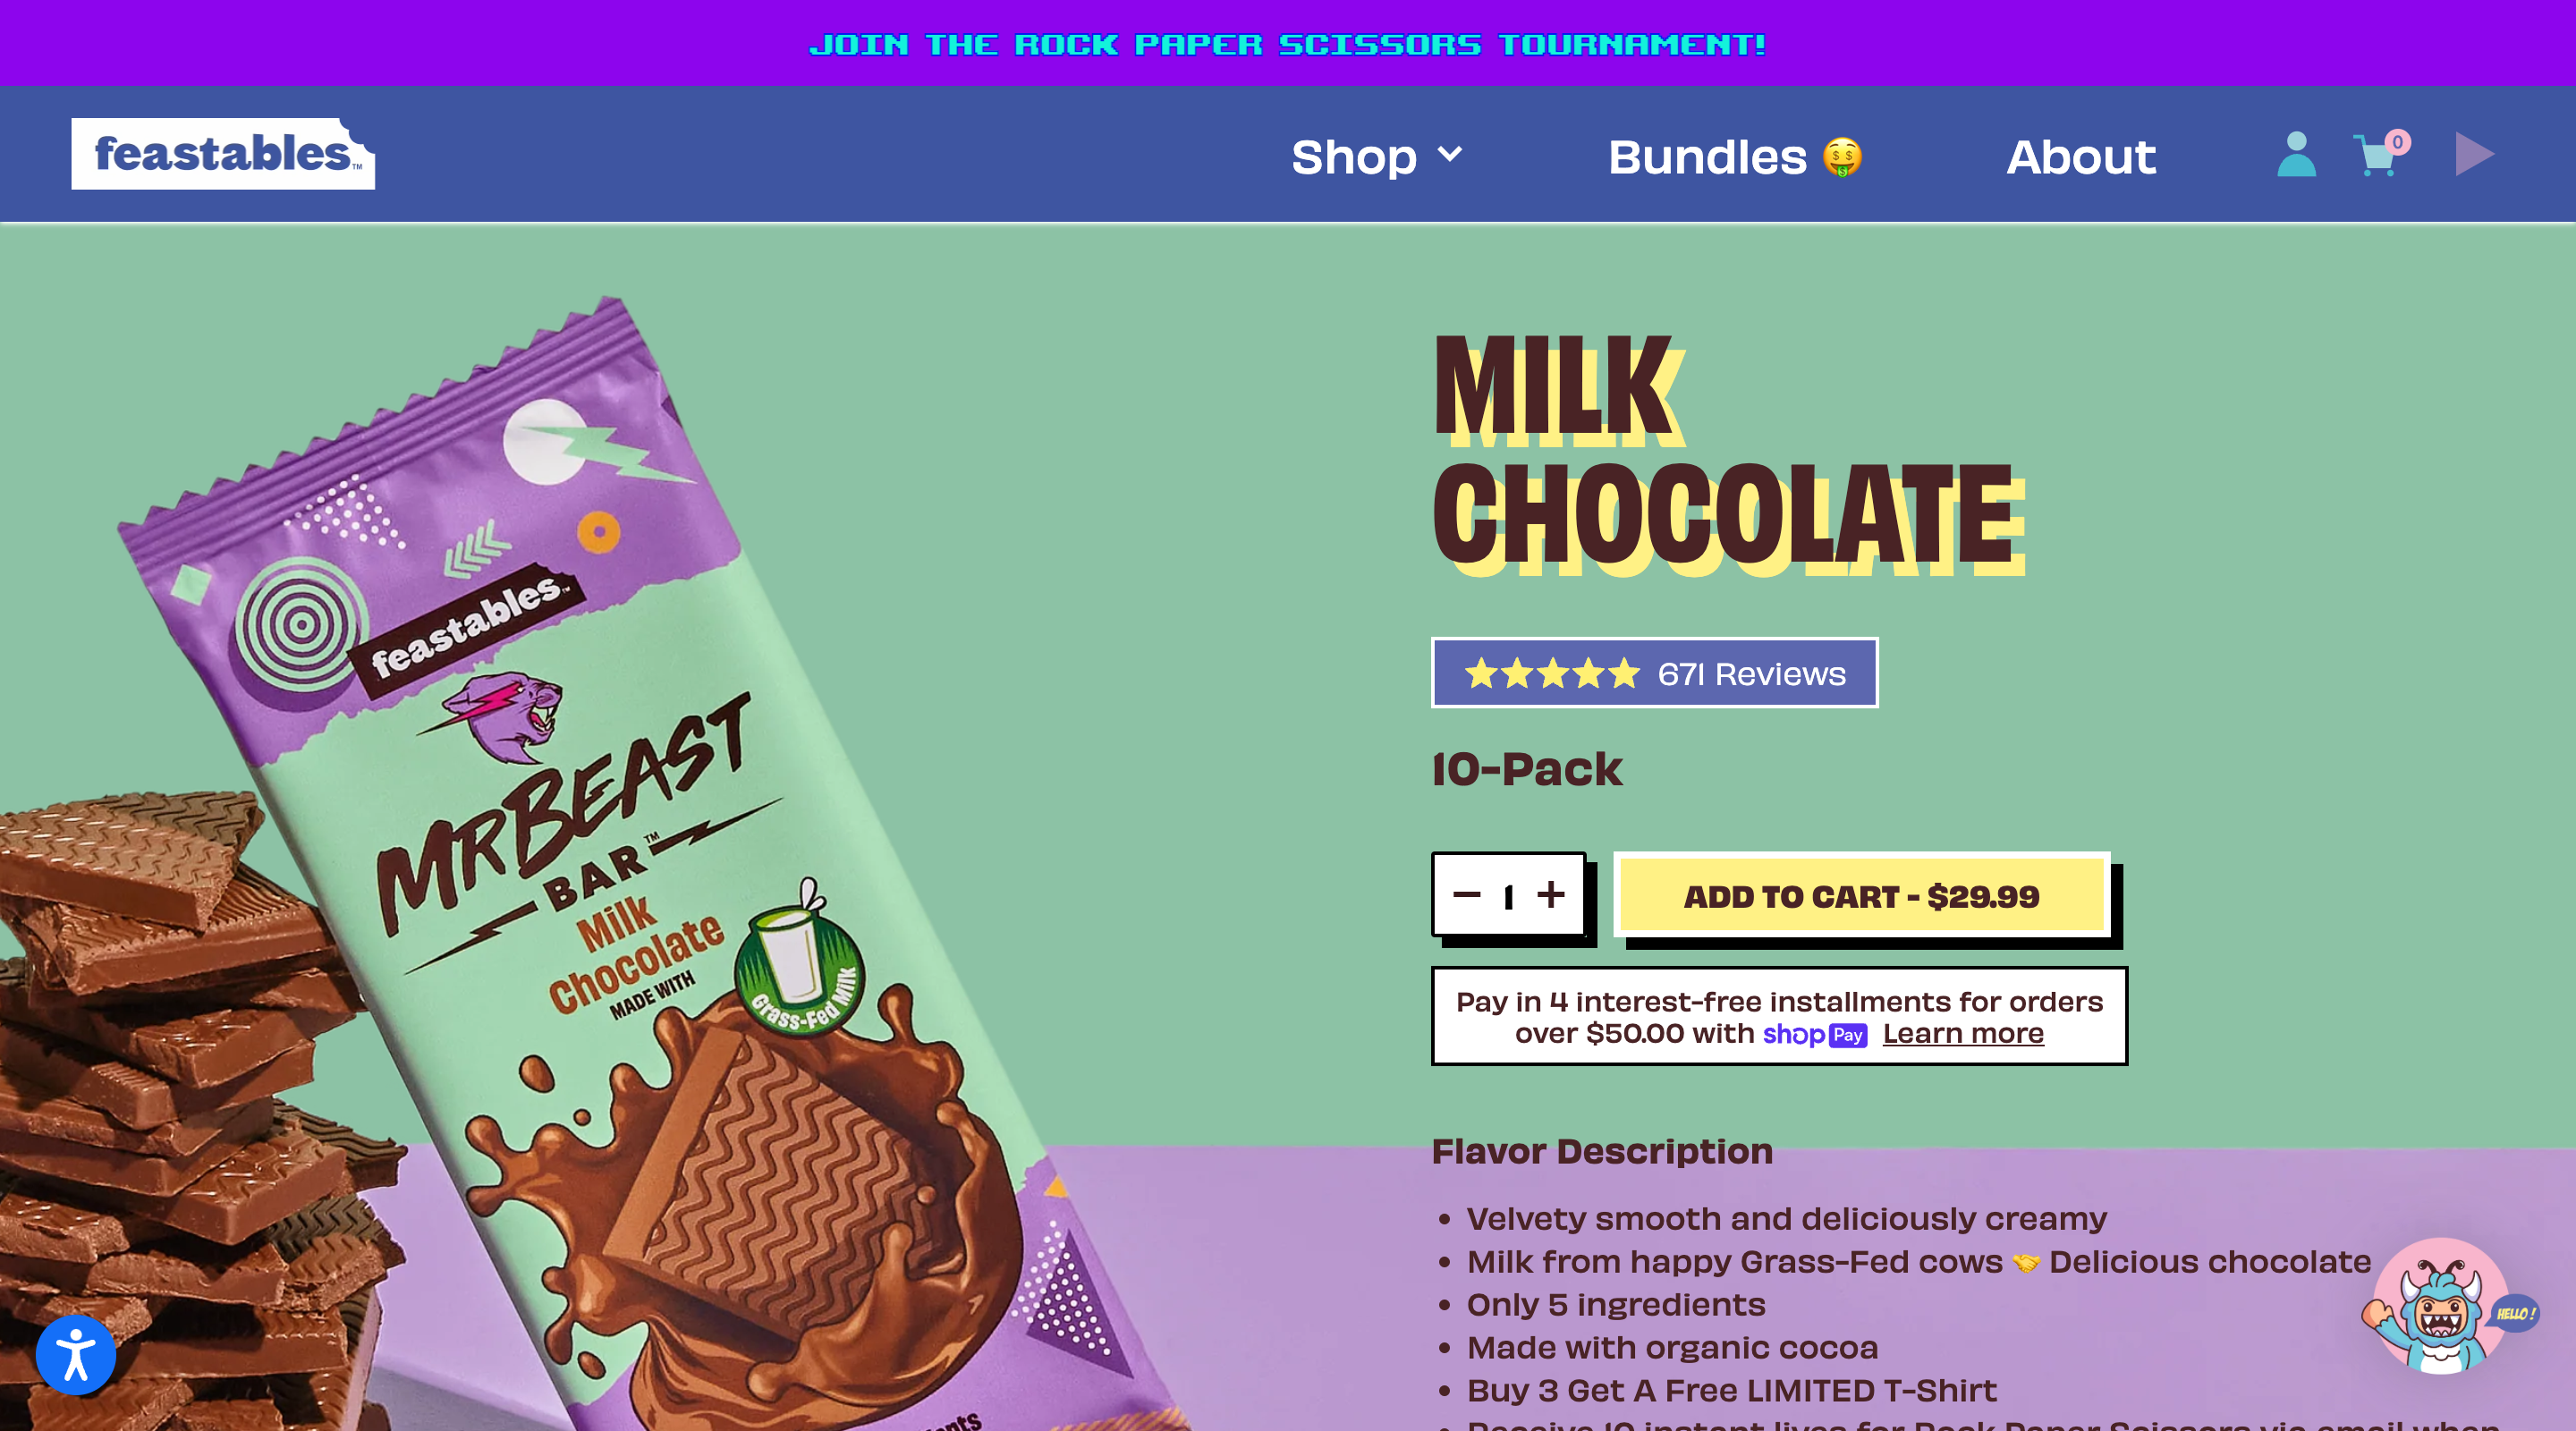 Screenshot of the 'Milk Chocolate' product page of the Feastables website. The left side of the screen shows a photograph of the Mr Beast Milk Chocolate Bar. The right side contains a product description and an 'Add to cart' button.